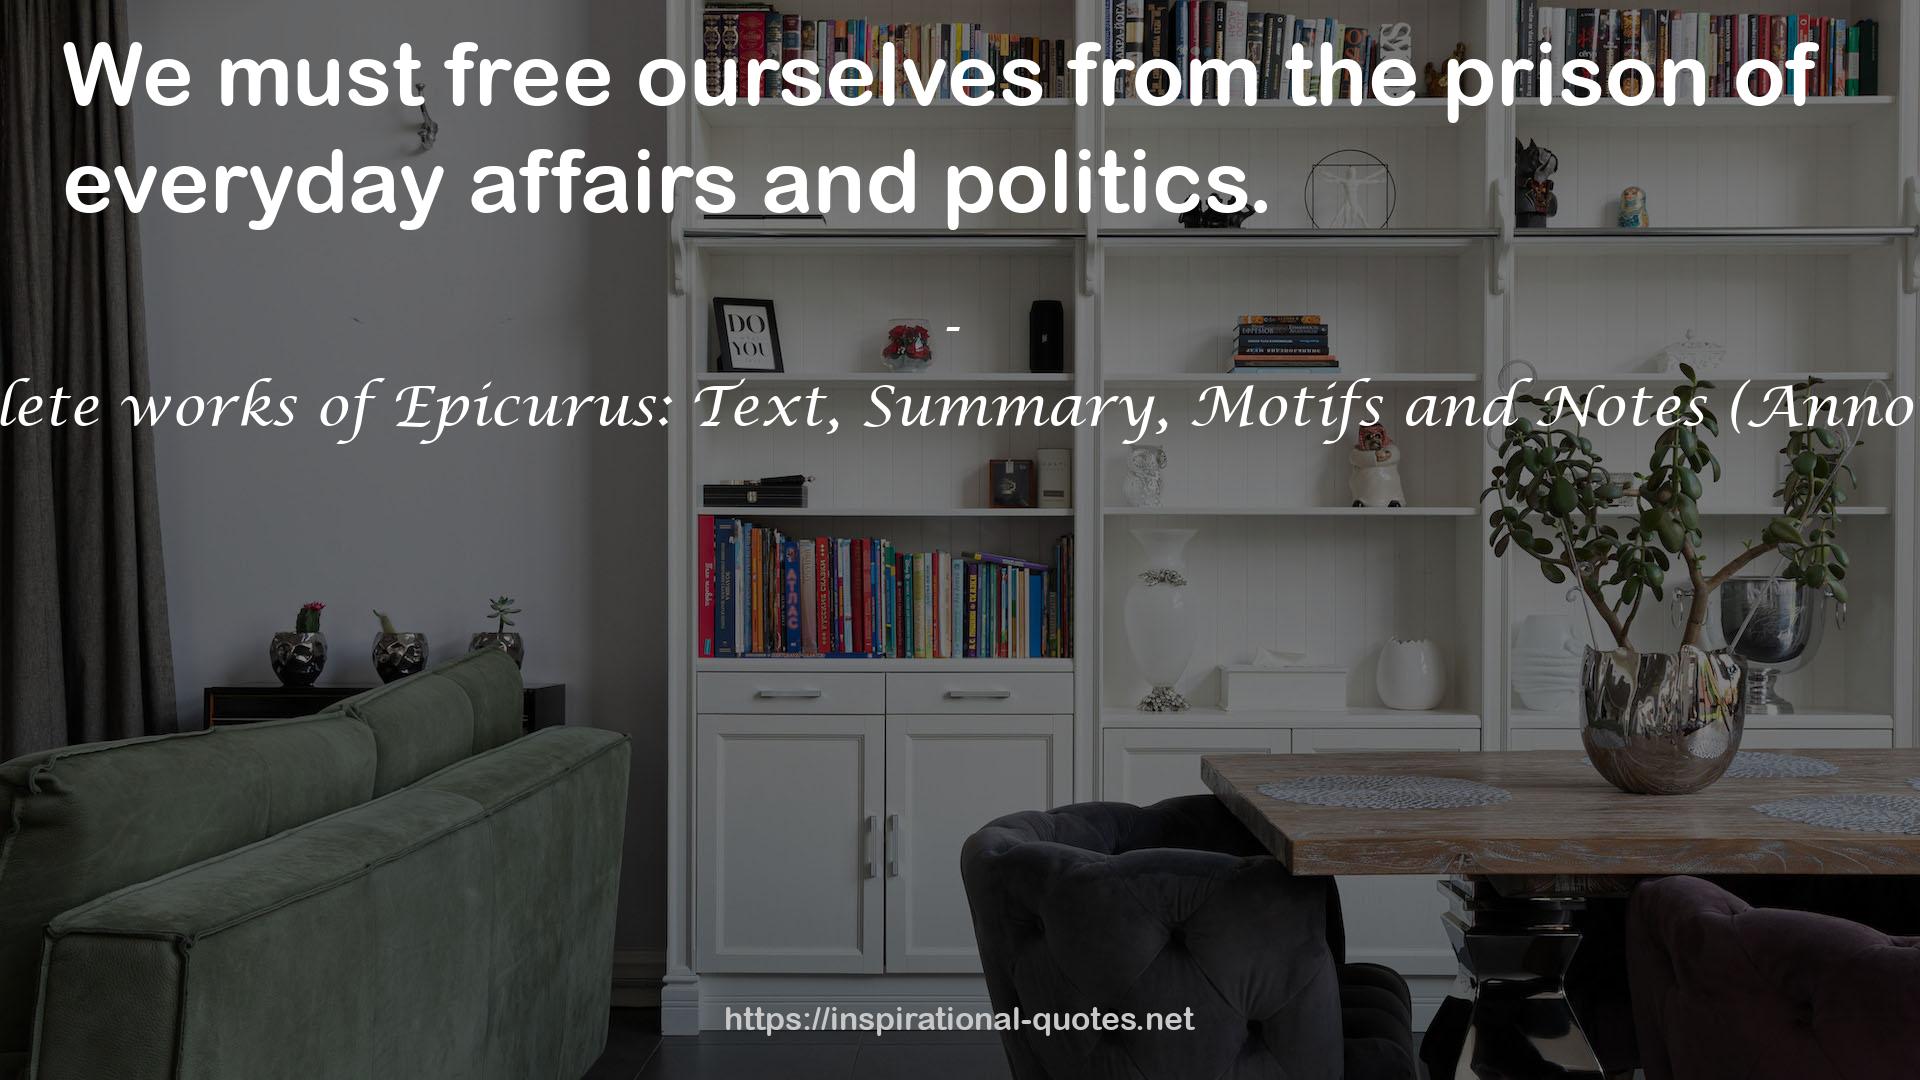 Complete works of Epicurus: Text, Summary, Motifs and Notes (Annotated) QUOTES